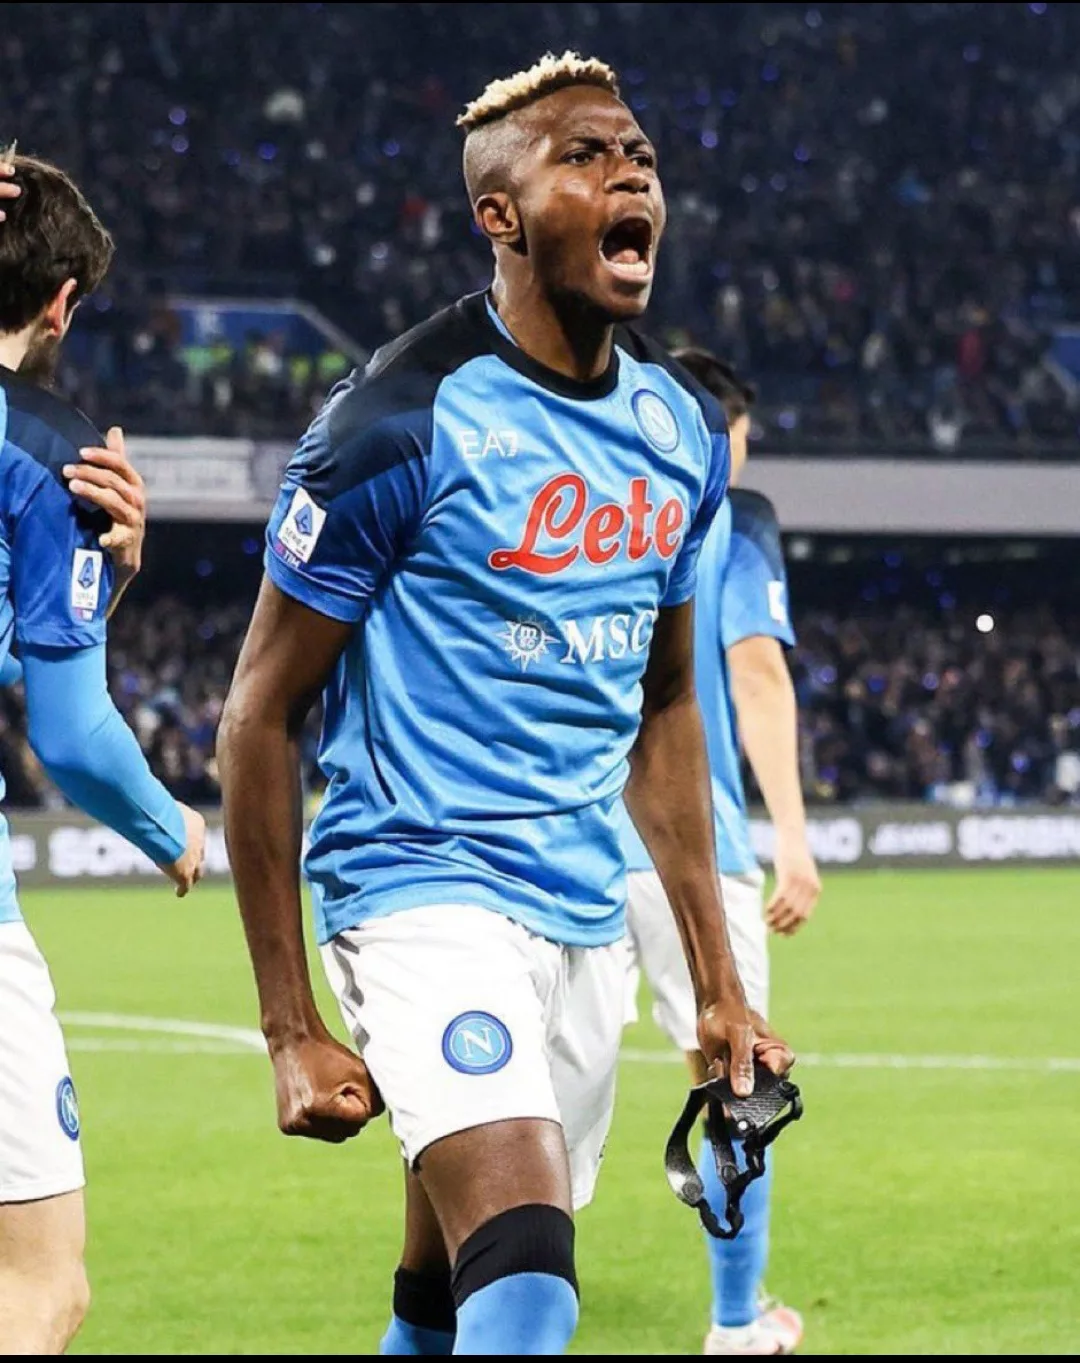 Victor Osimhen ends goal-drought against Udinese Calcio.